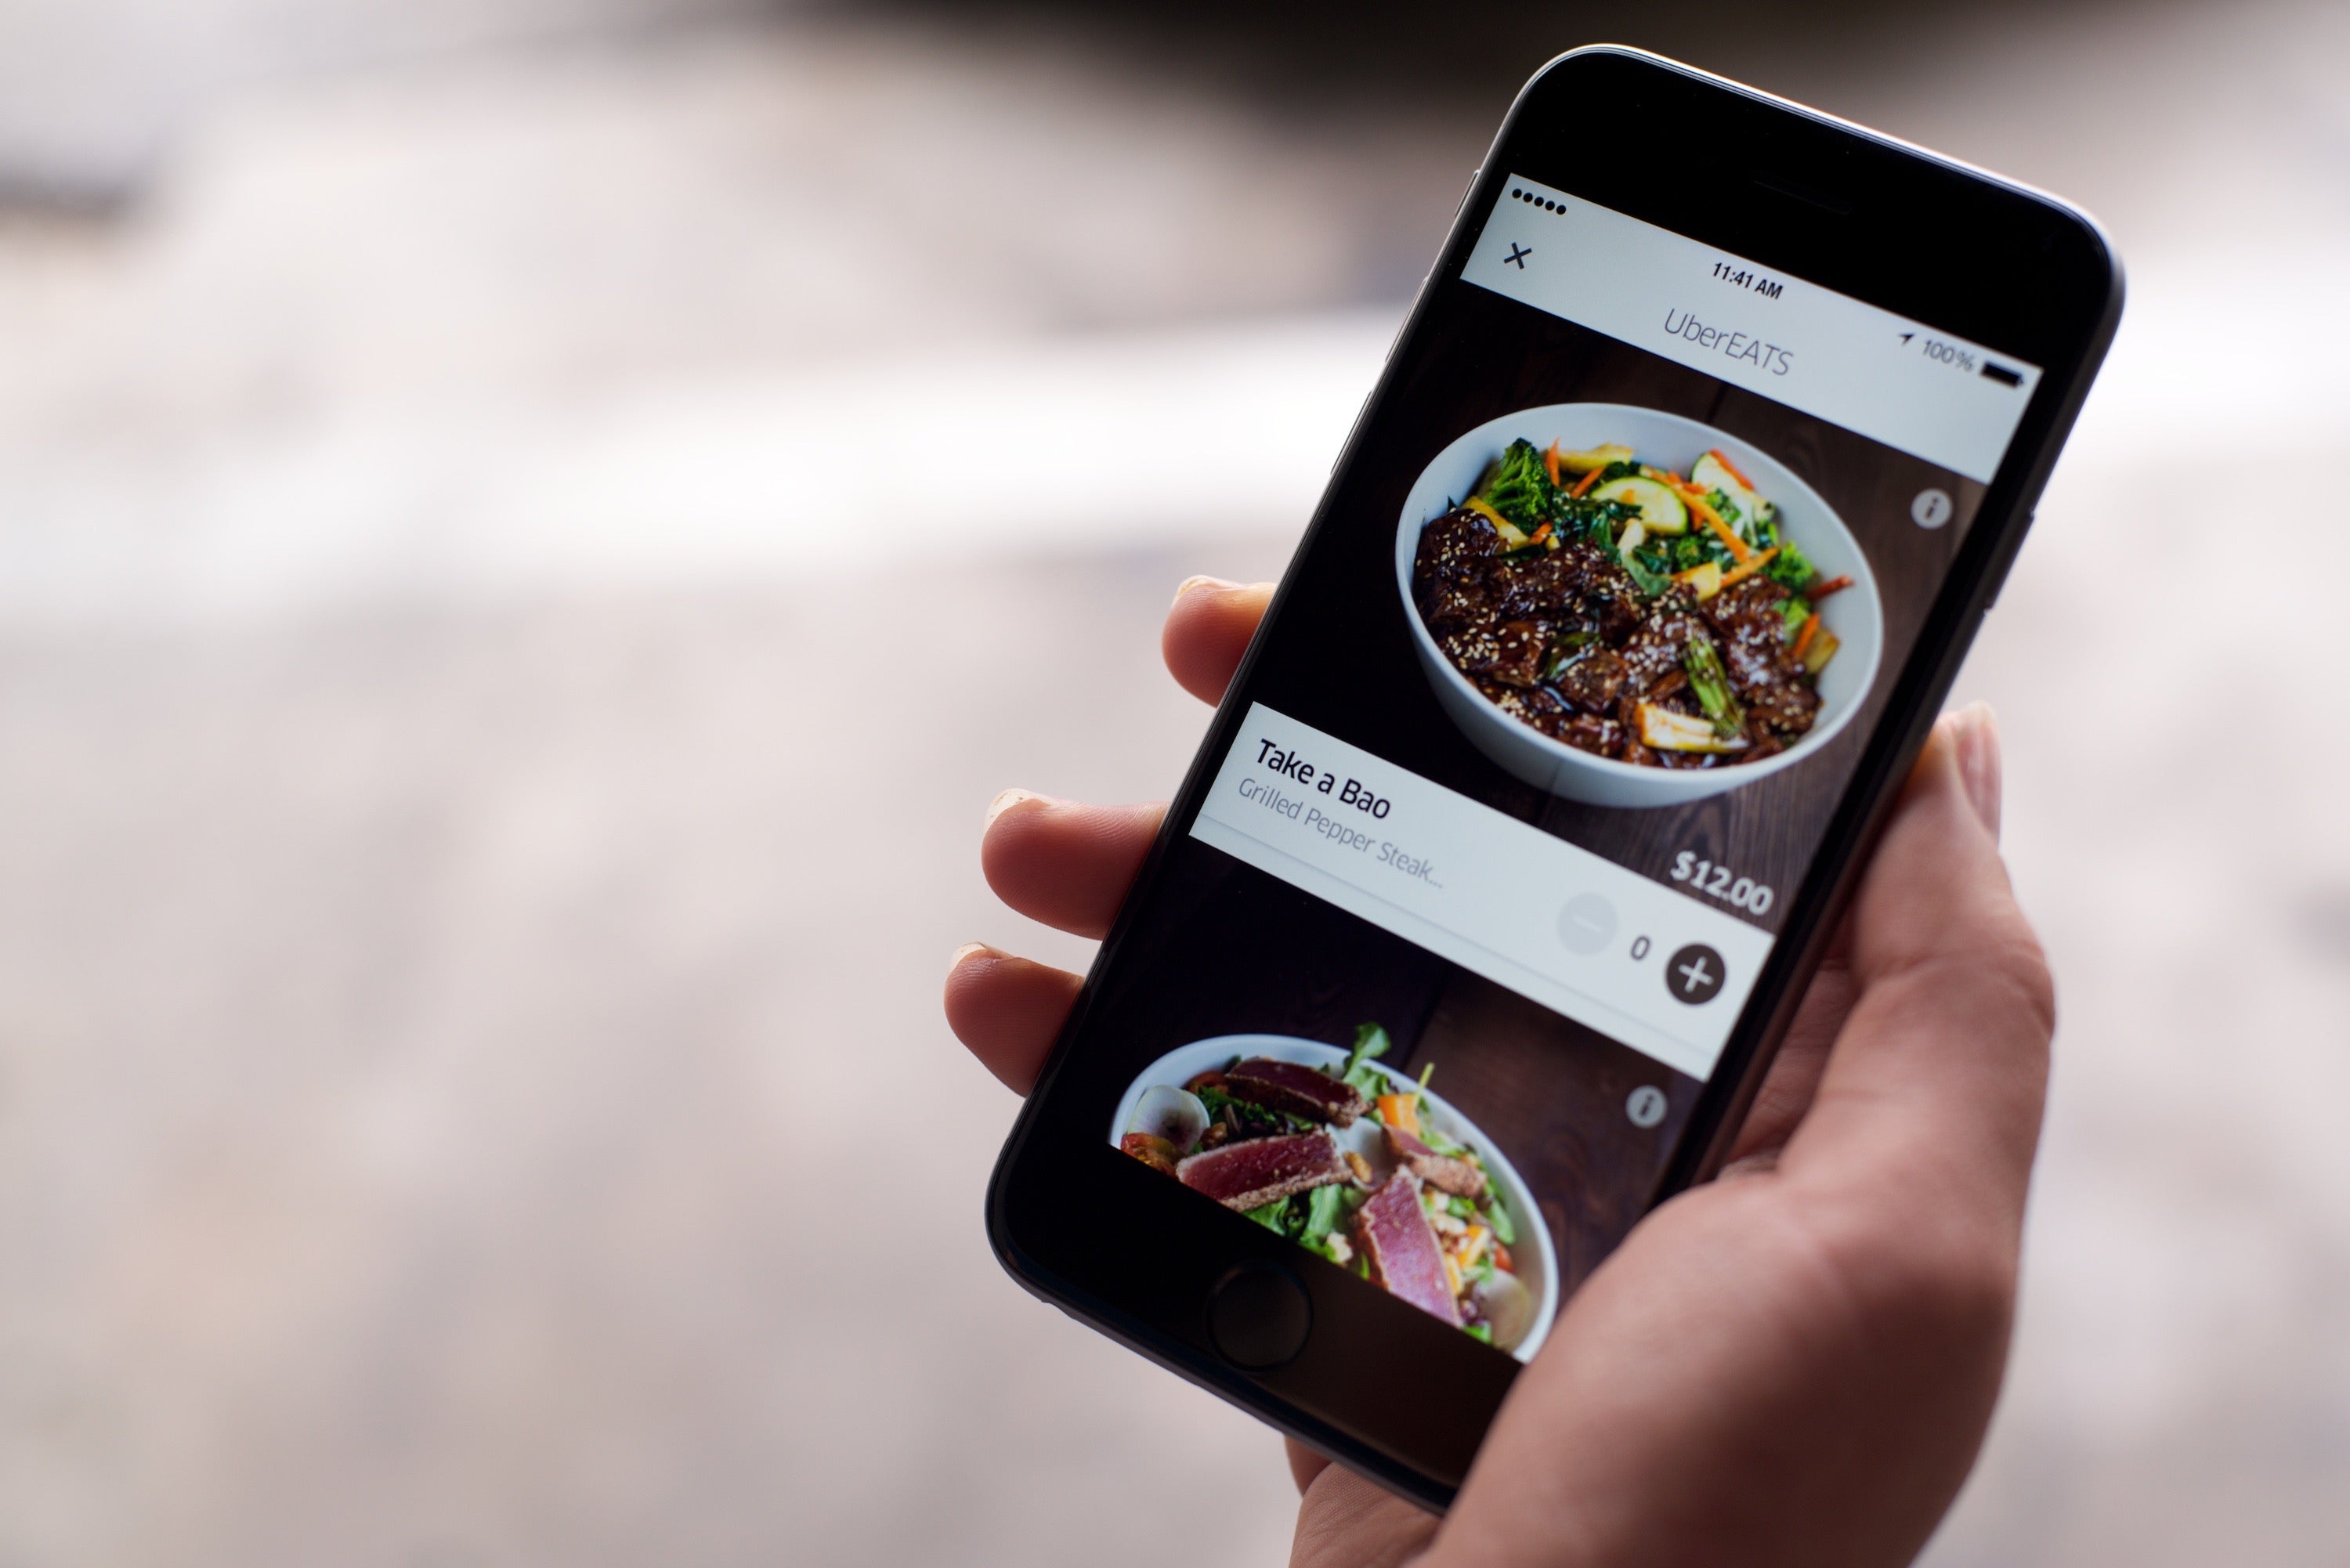 UberEATS will soon allow you to get food delivered to your door in India